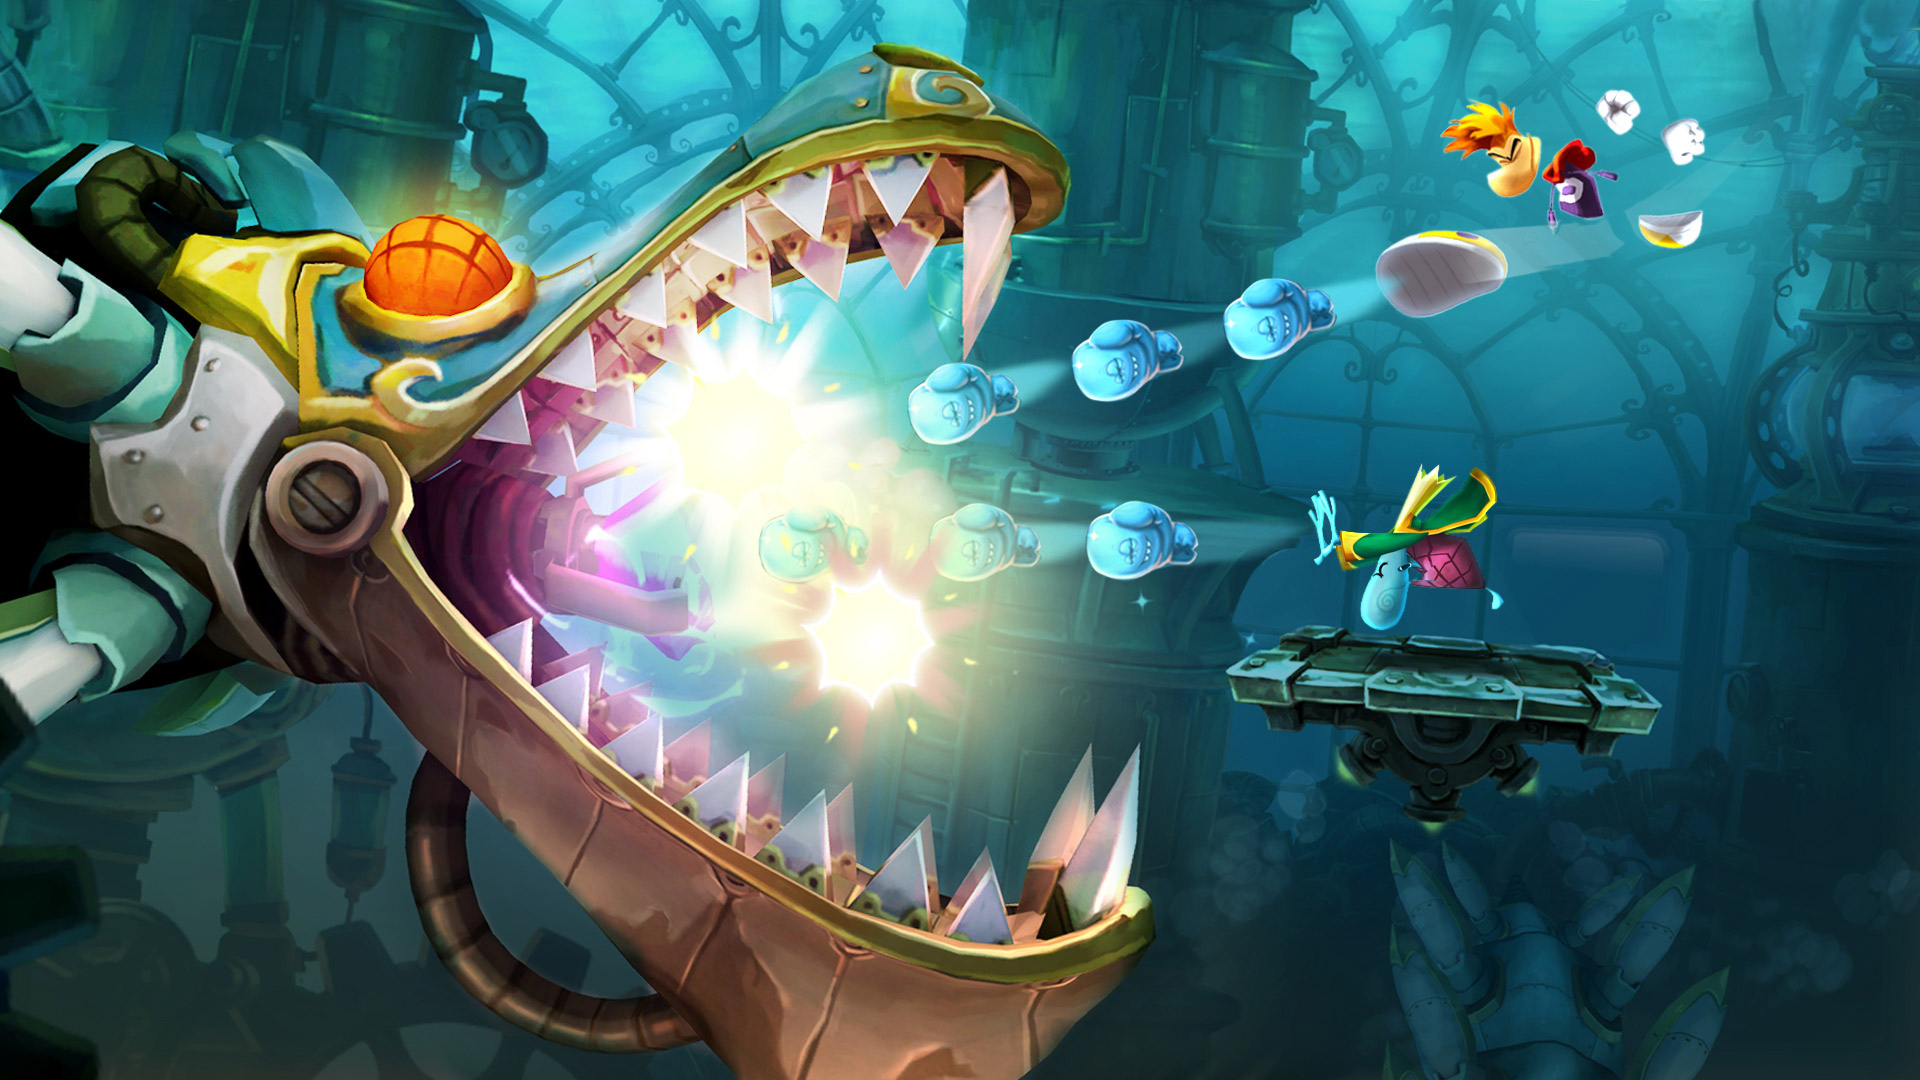 Rayman Legends: Definitive Edition at the best price